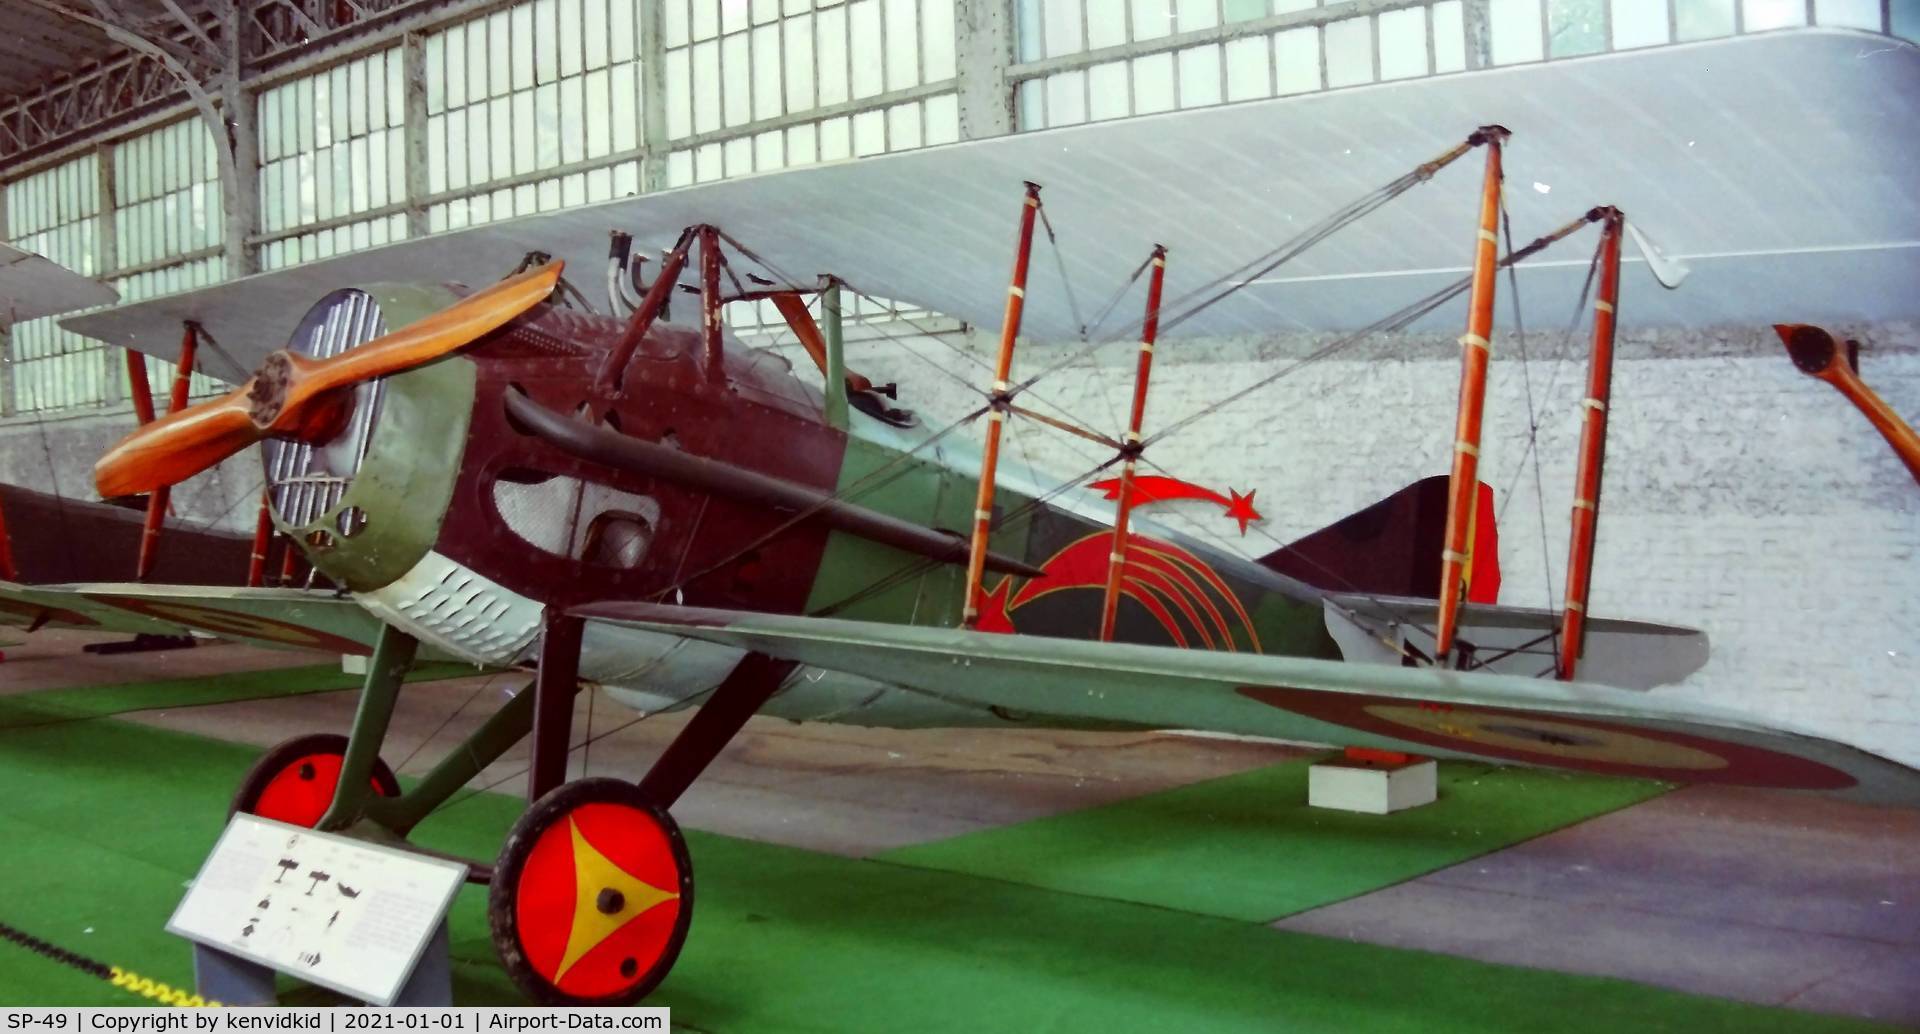 SP-49, SPAD S-XIII C1 C/N Not found SP-49, At the Brussels Aviation Museum in 2000.